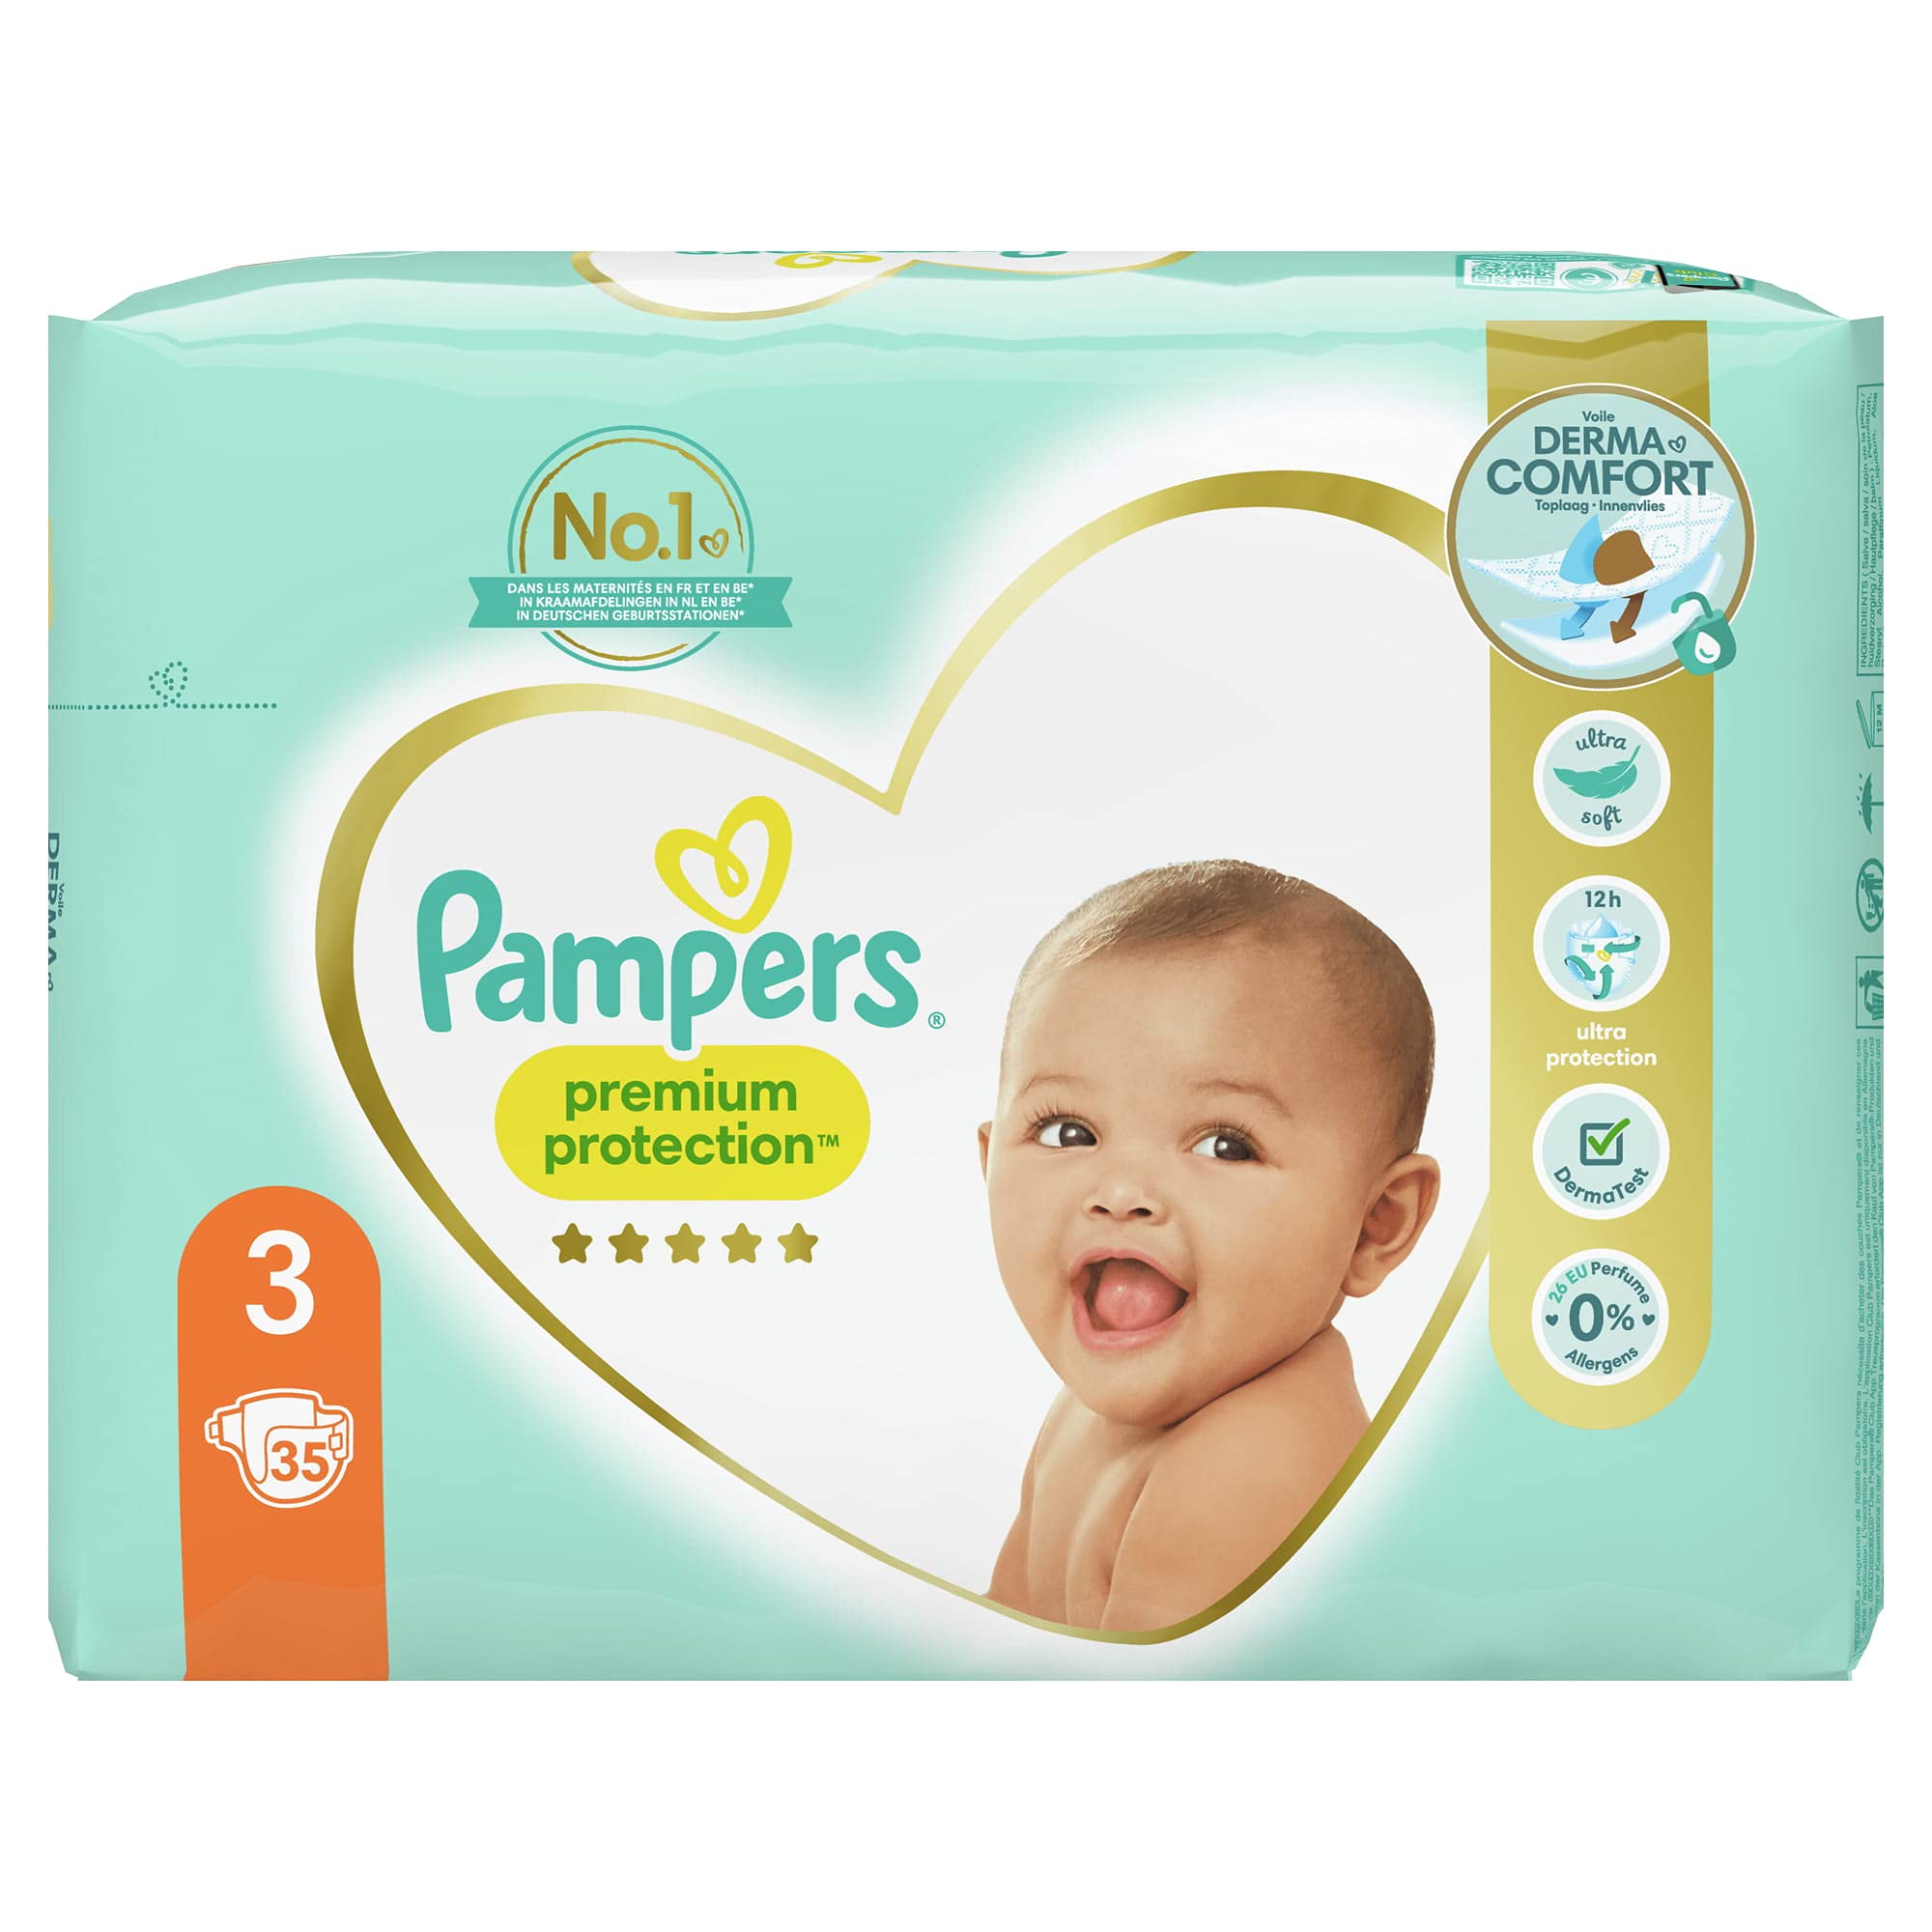 pampers active baby monthly box